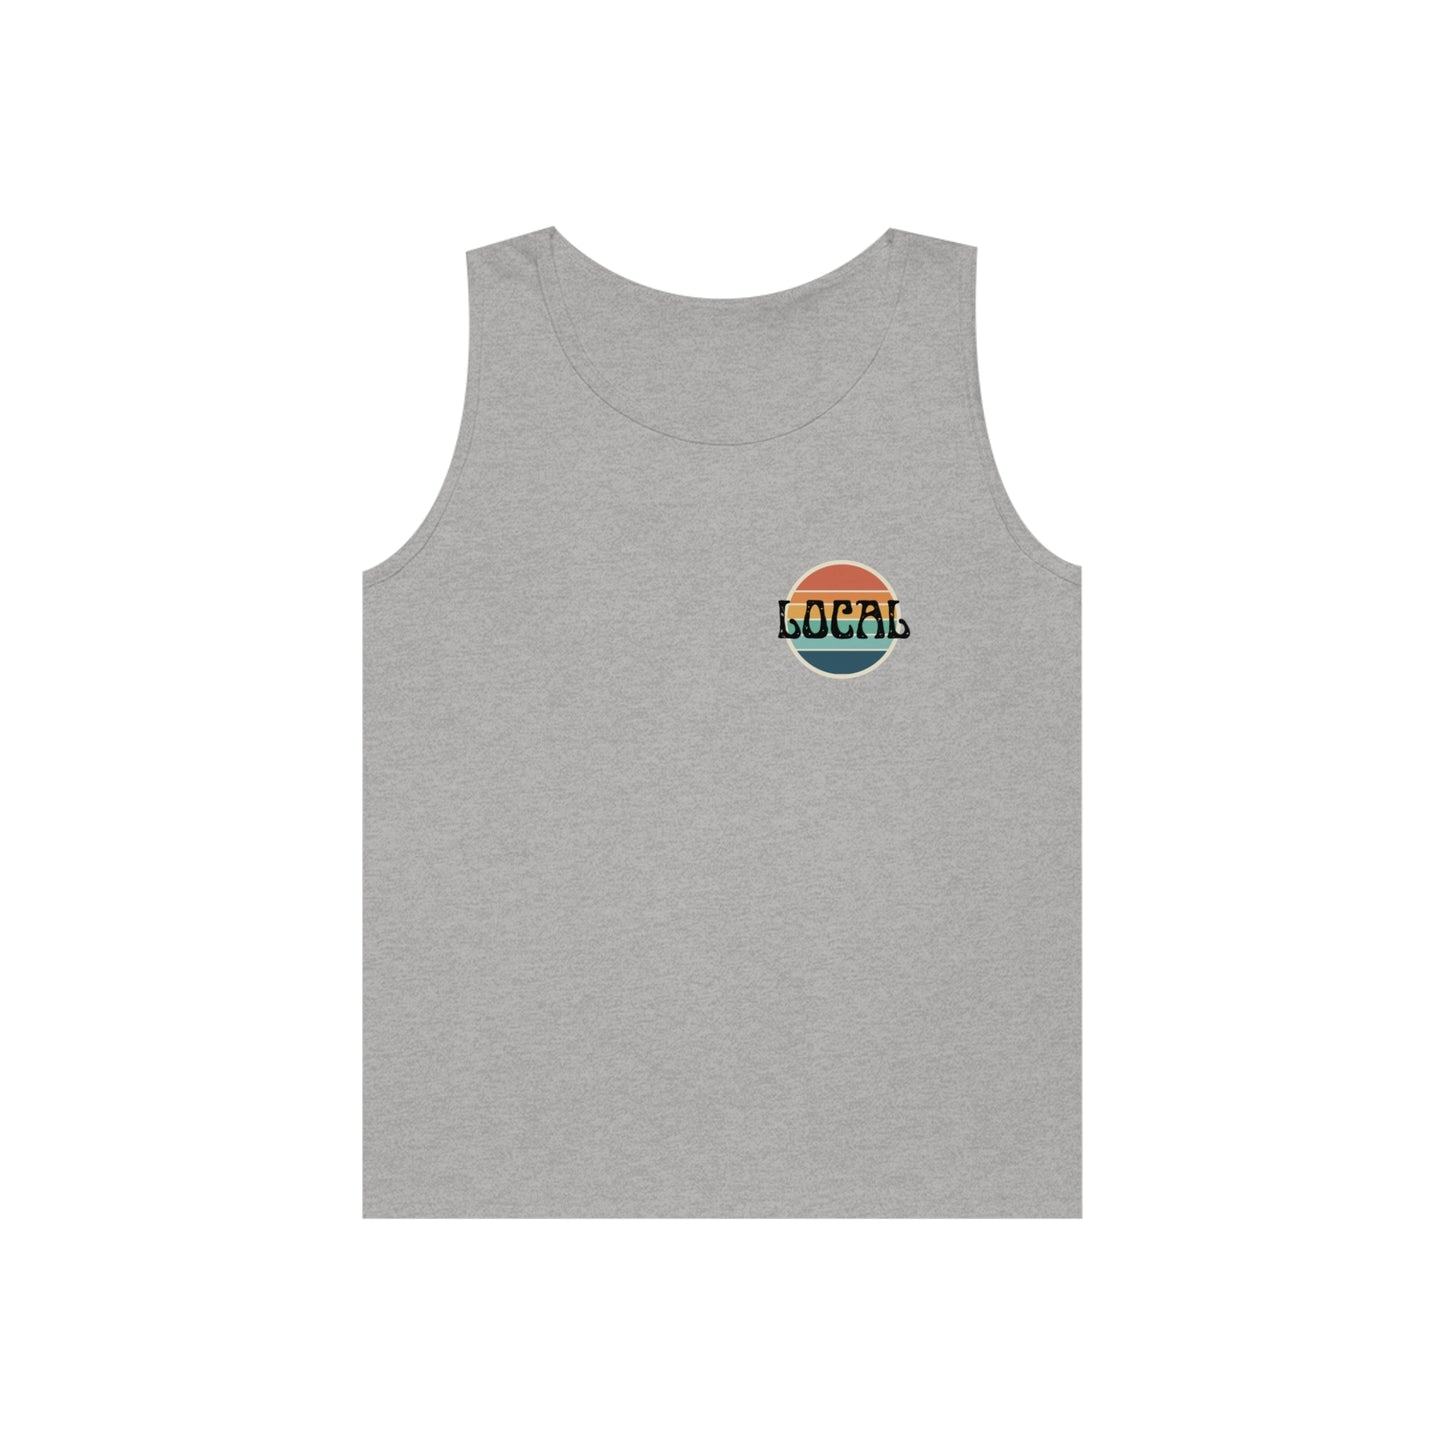 Respect the Locals unisex tank top - 2 colors available